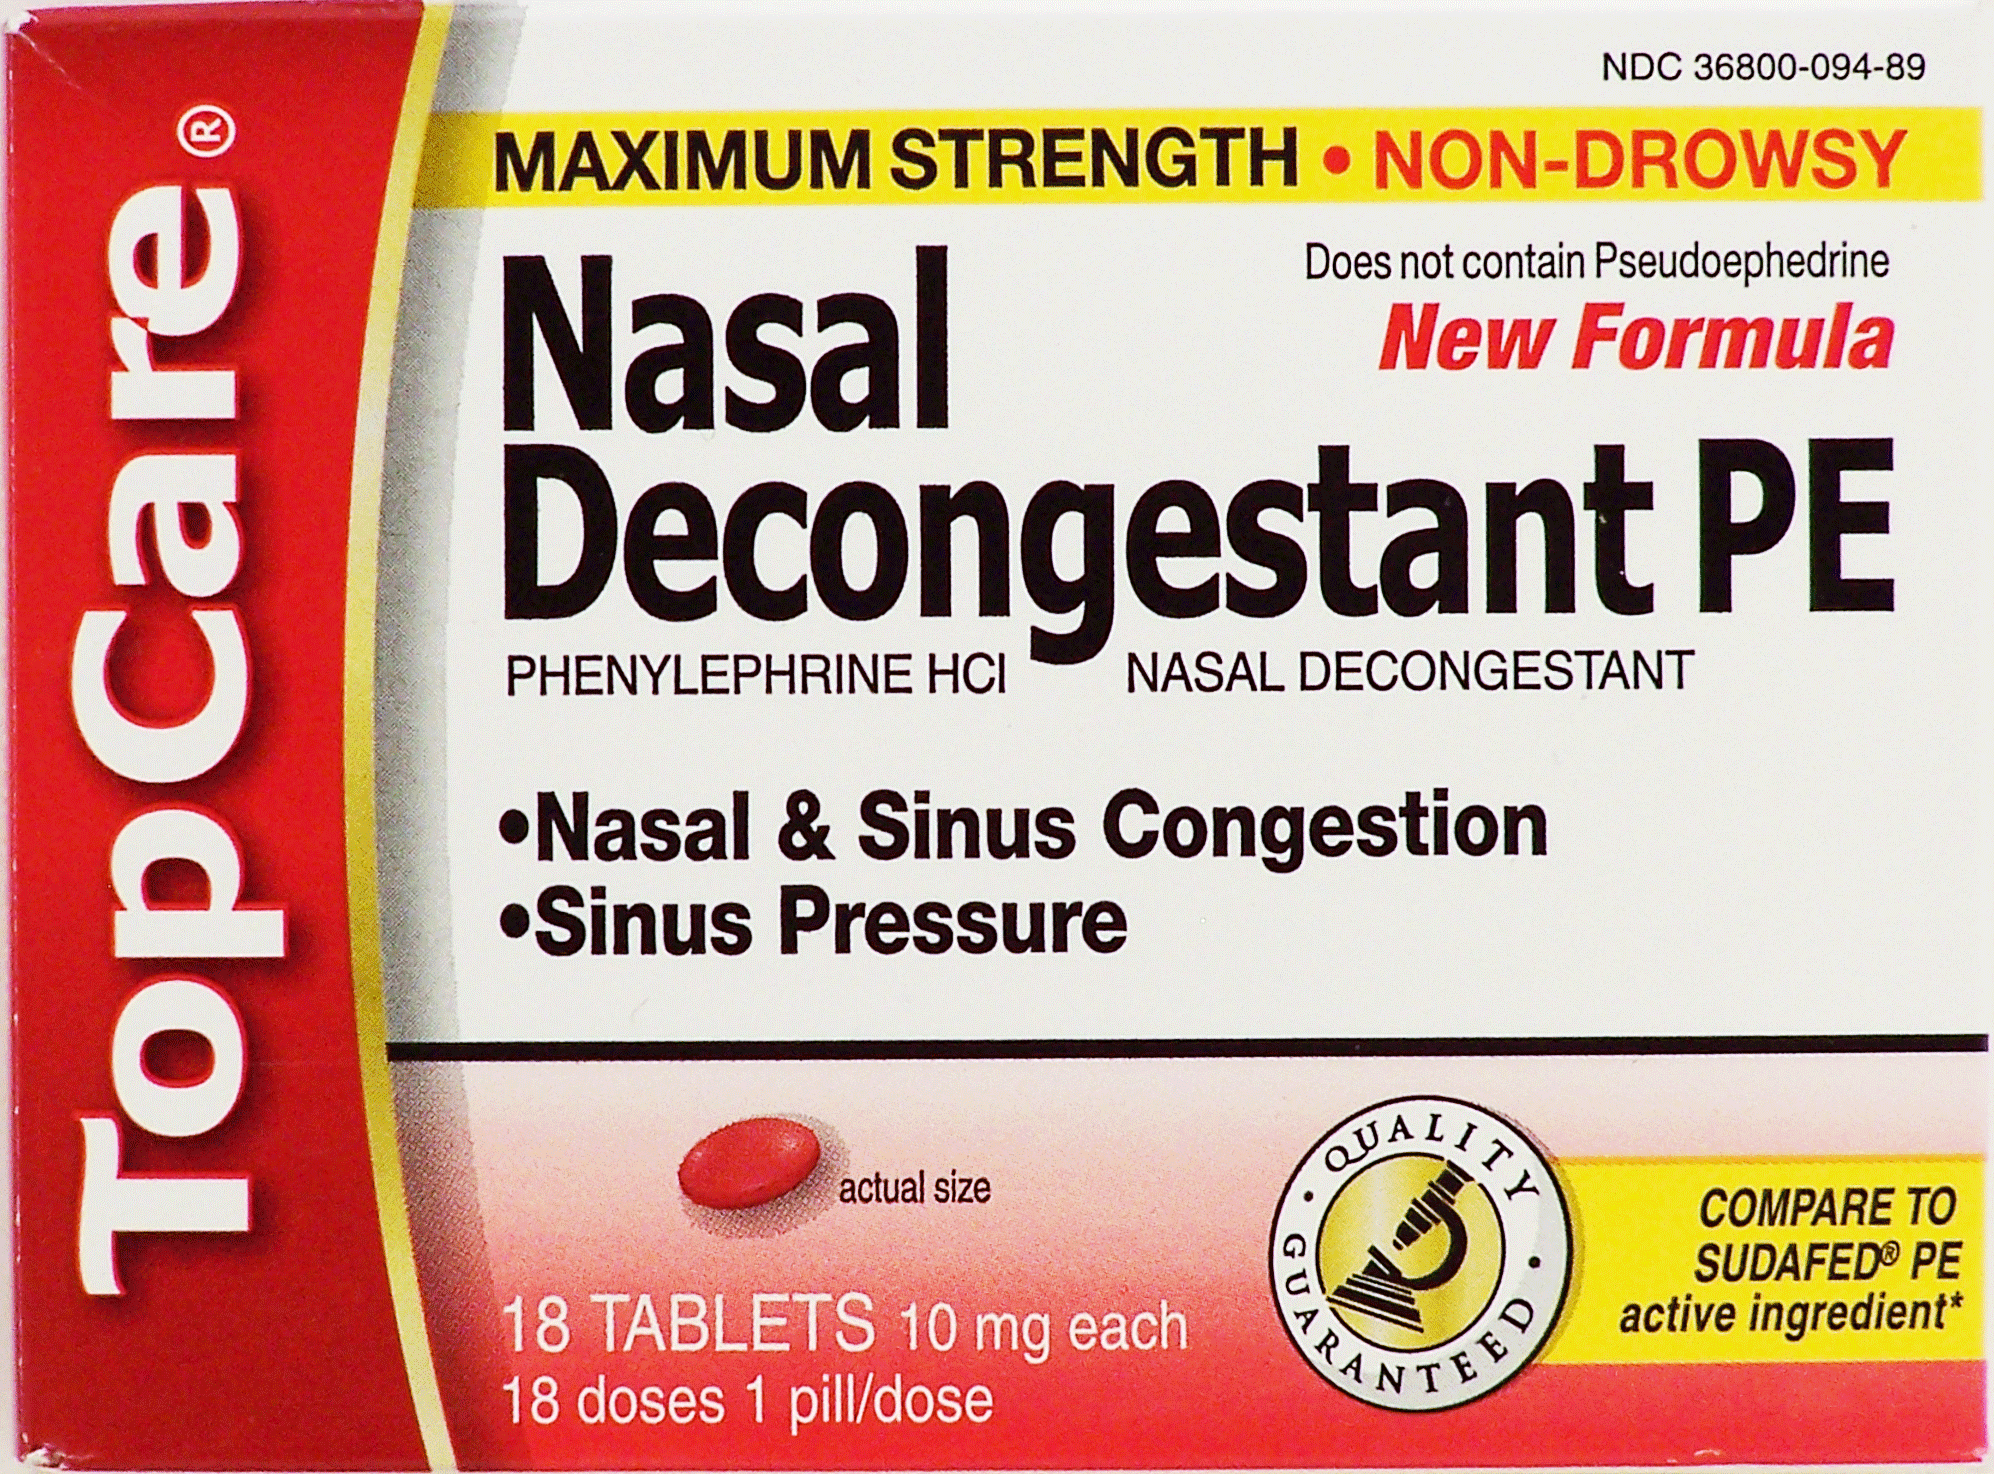 Top Care Nasal Decongestant PE maximum strength nasal decongestant, non-drowsy, 10 mg tablets Full-Size Picture